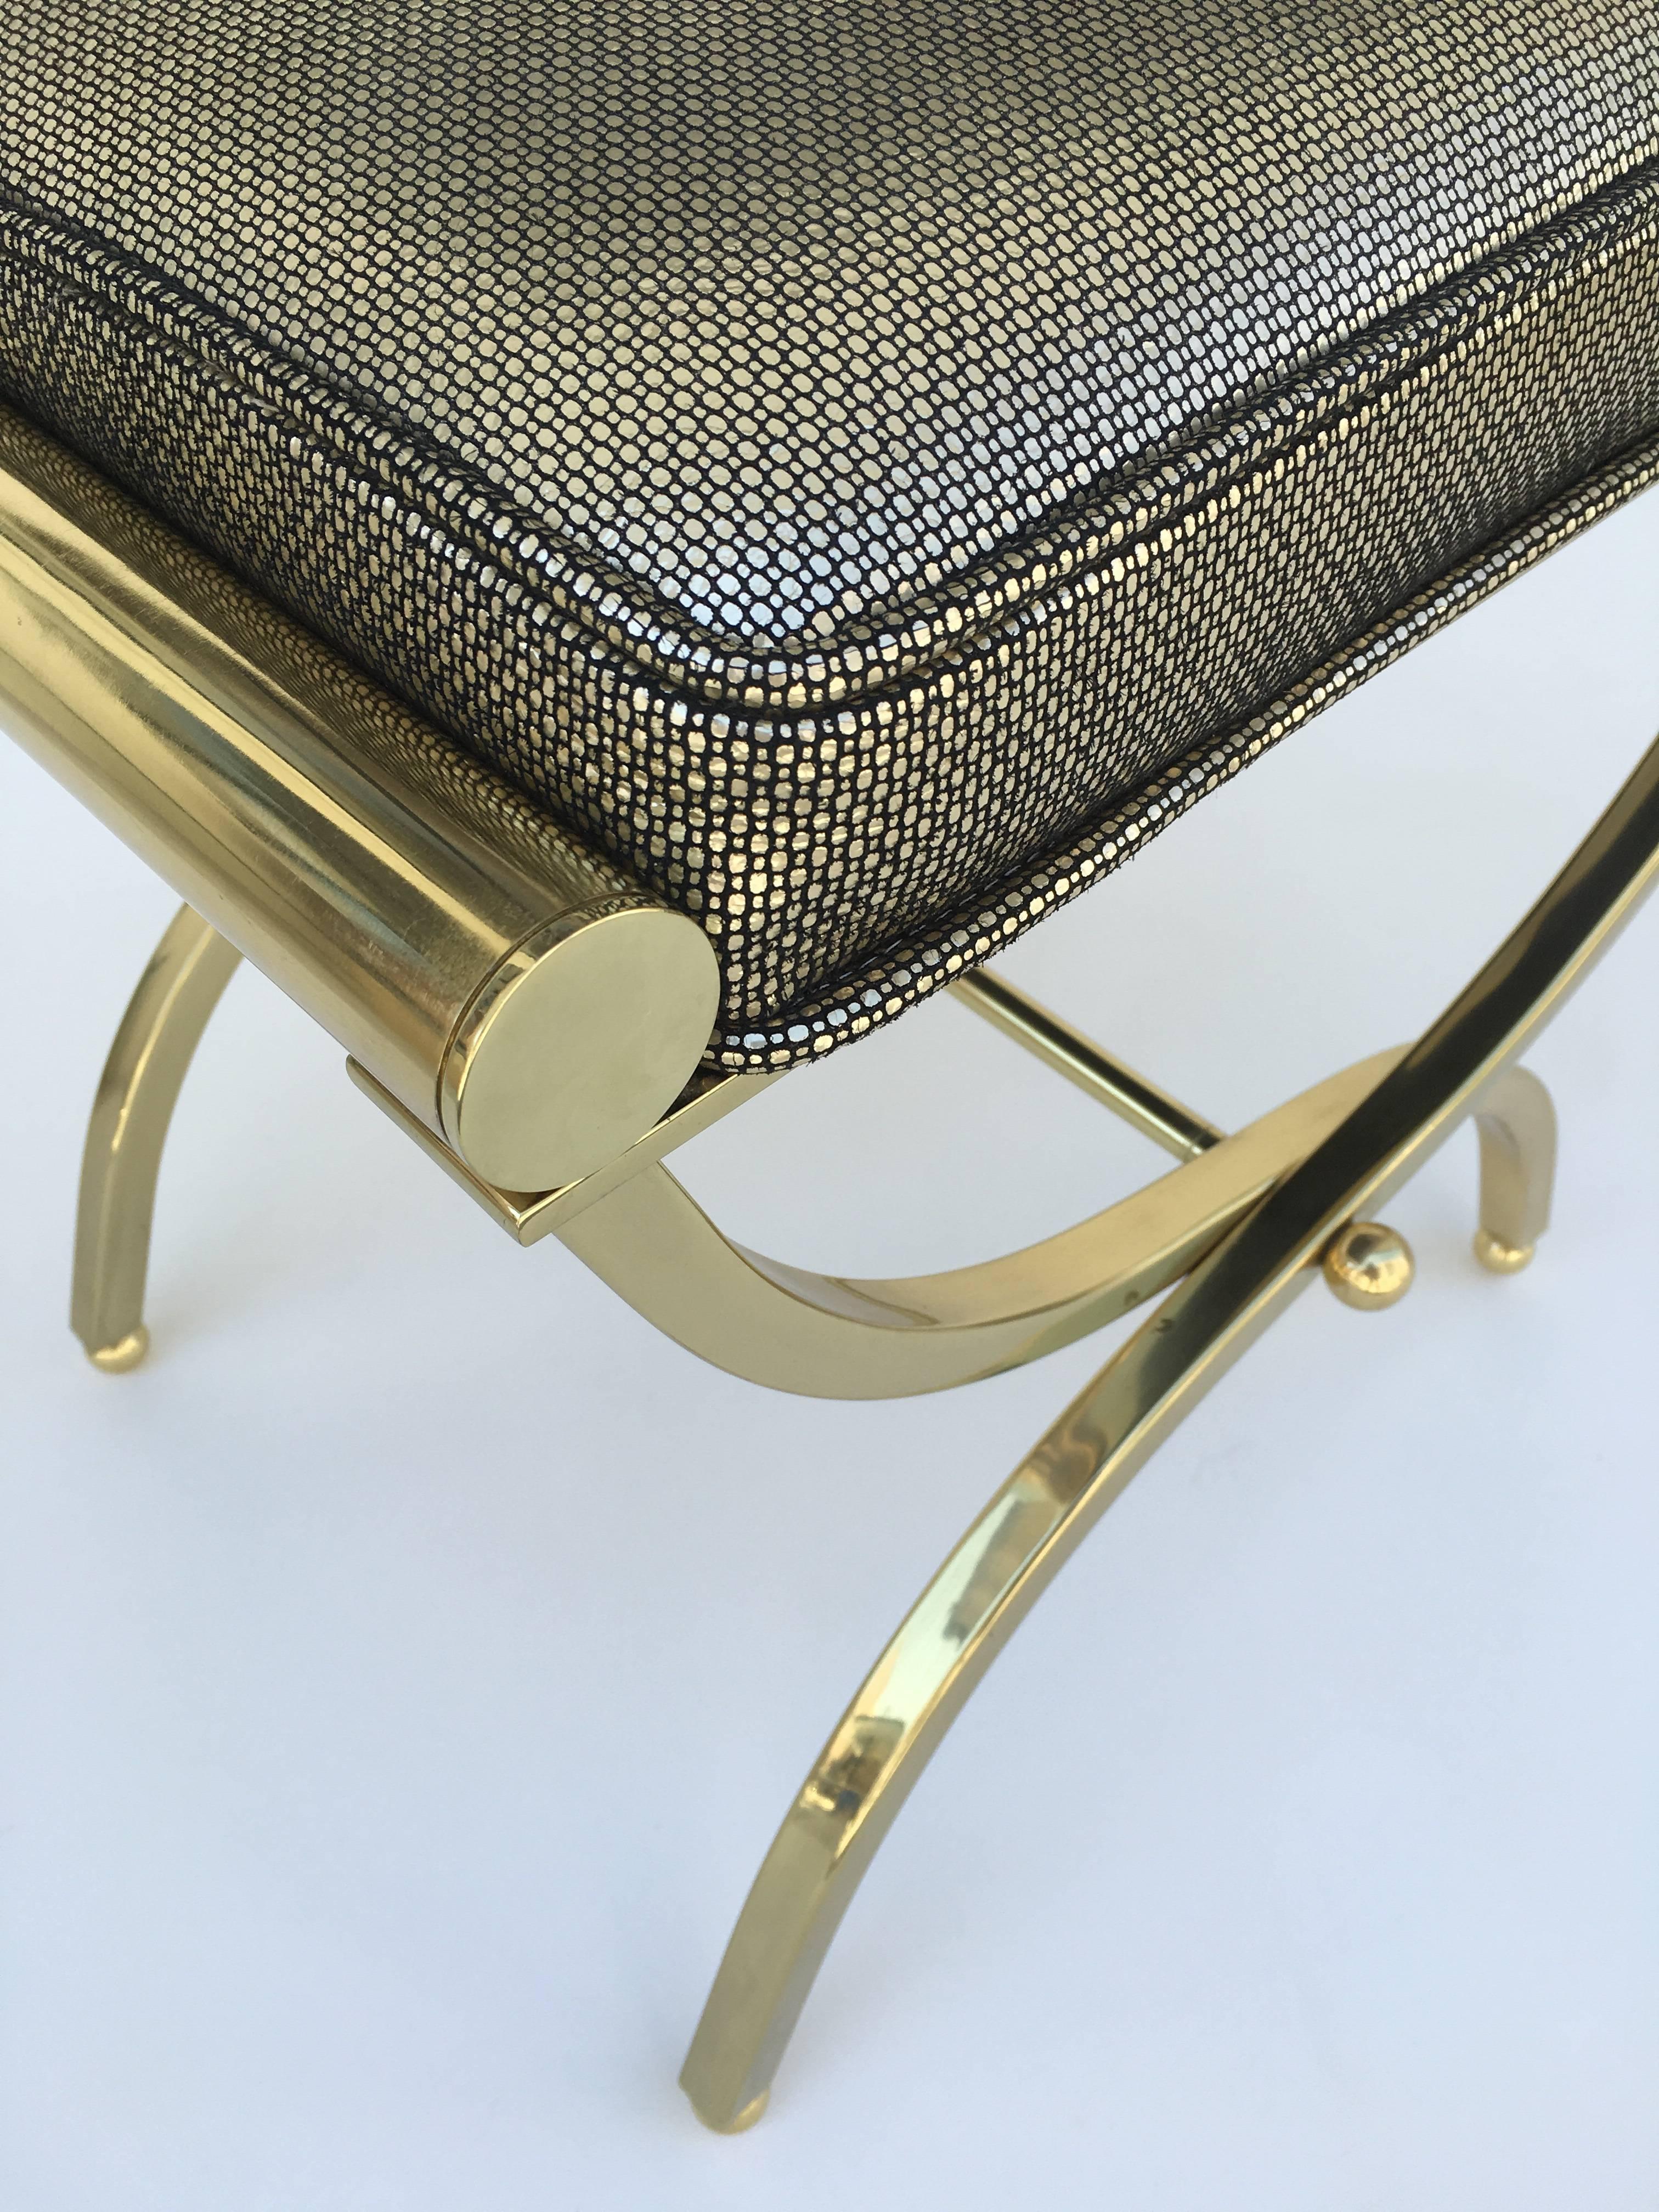 Polished Brass and Leather Vanity Stool by Charles Hollis Jones 2